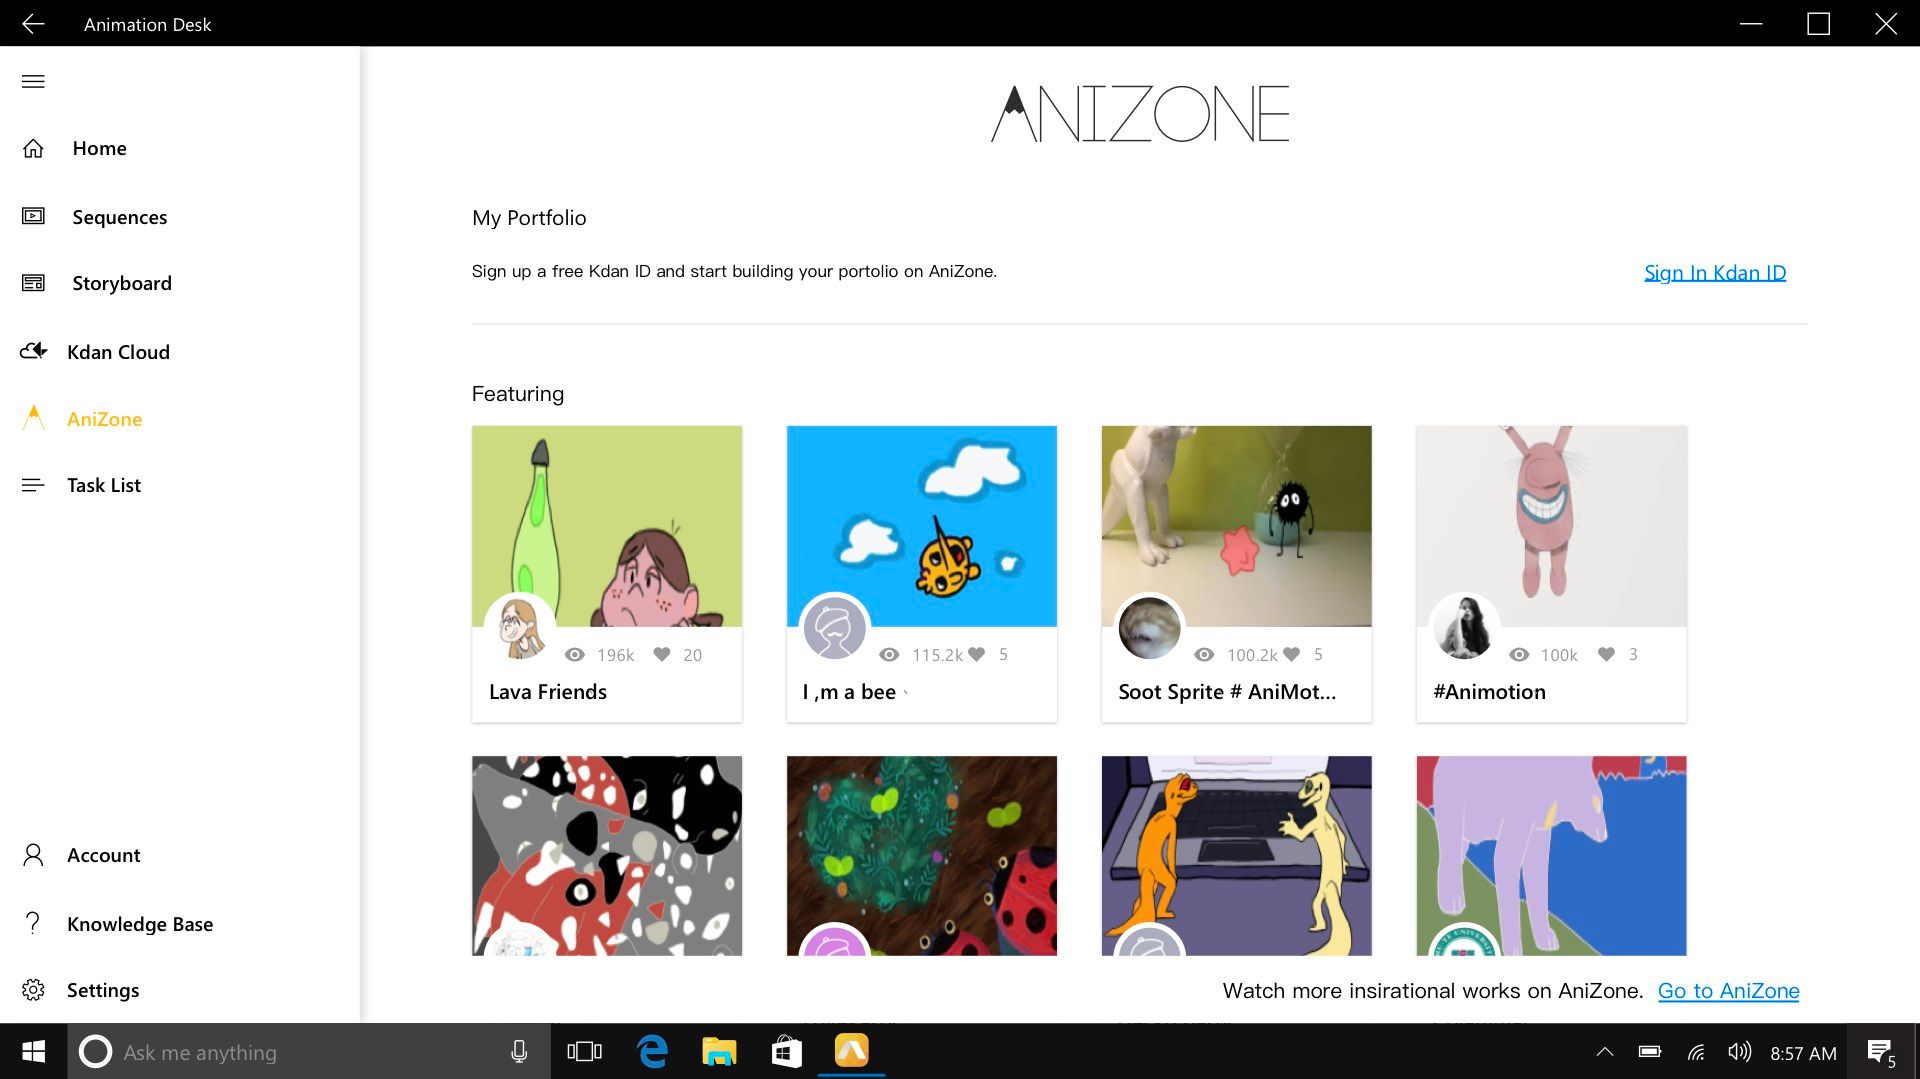 Join AniZone to discover that other animators are working on